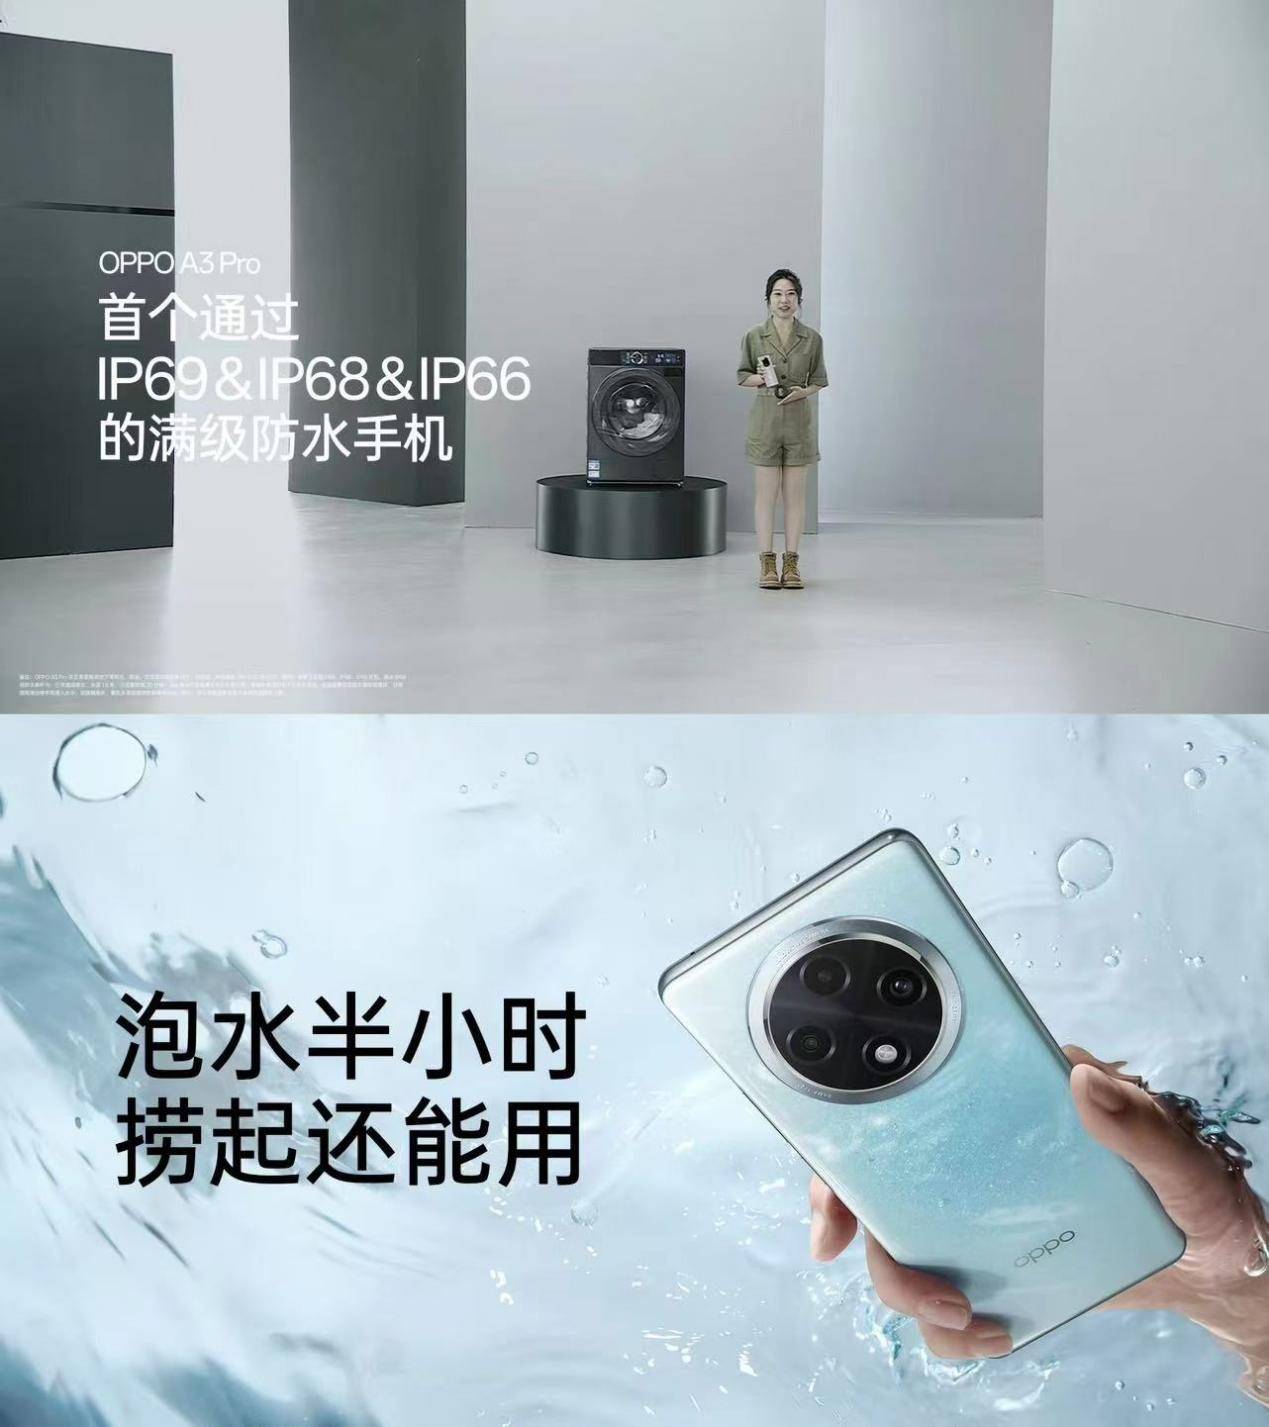 The fully waterproof OPPO A3 Pro